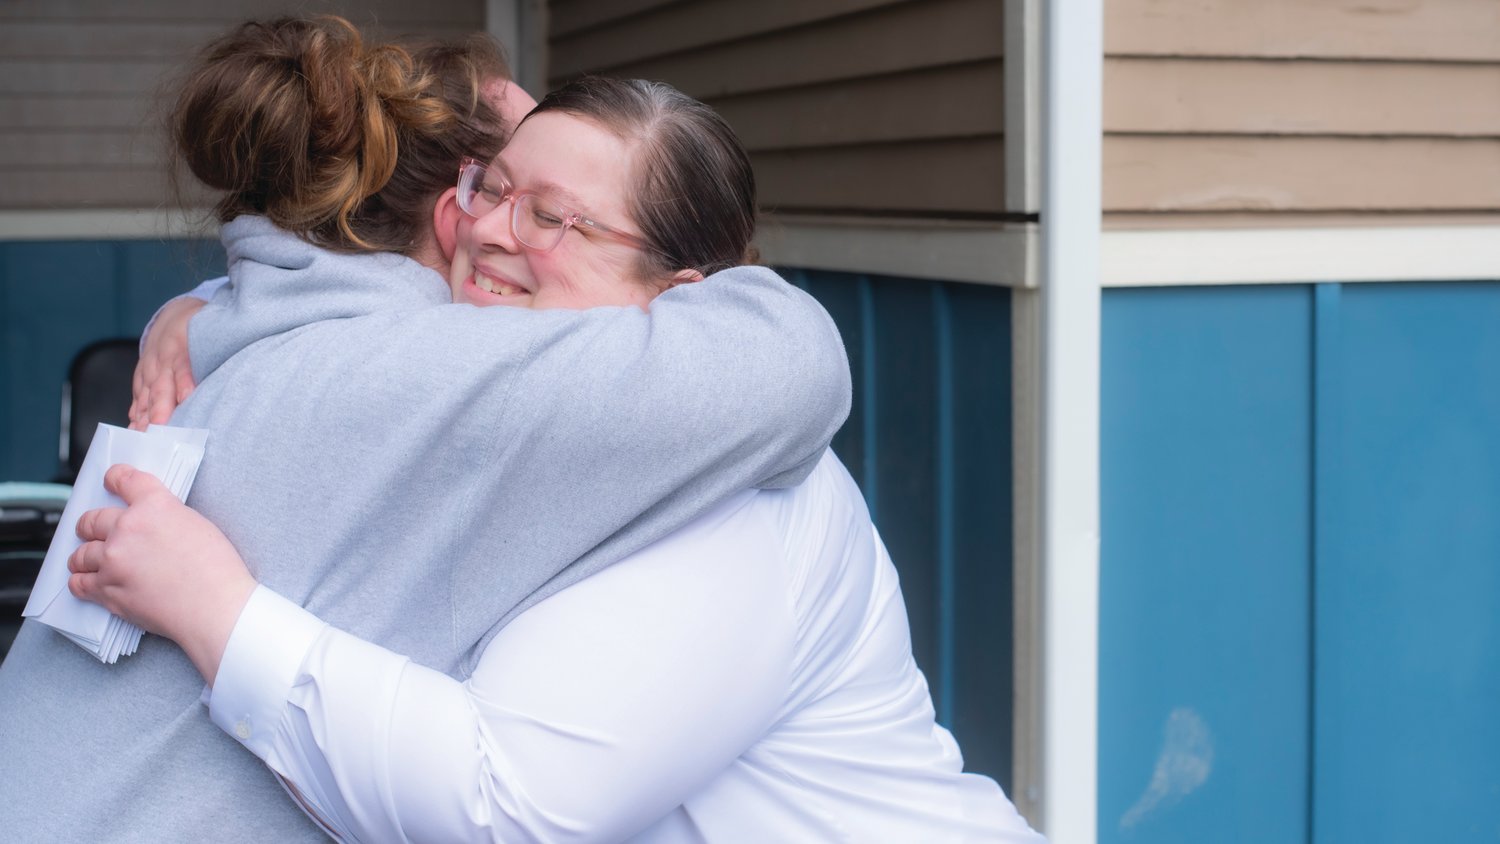 Gin Pack with The Salvation Army receives an embrace from a resident at the Chehalis Avenue Apartments Wednesday while helping to move items back into rooms after buildings were evacuated due to flooding last January.